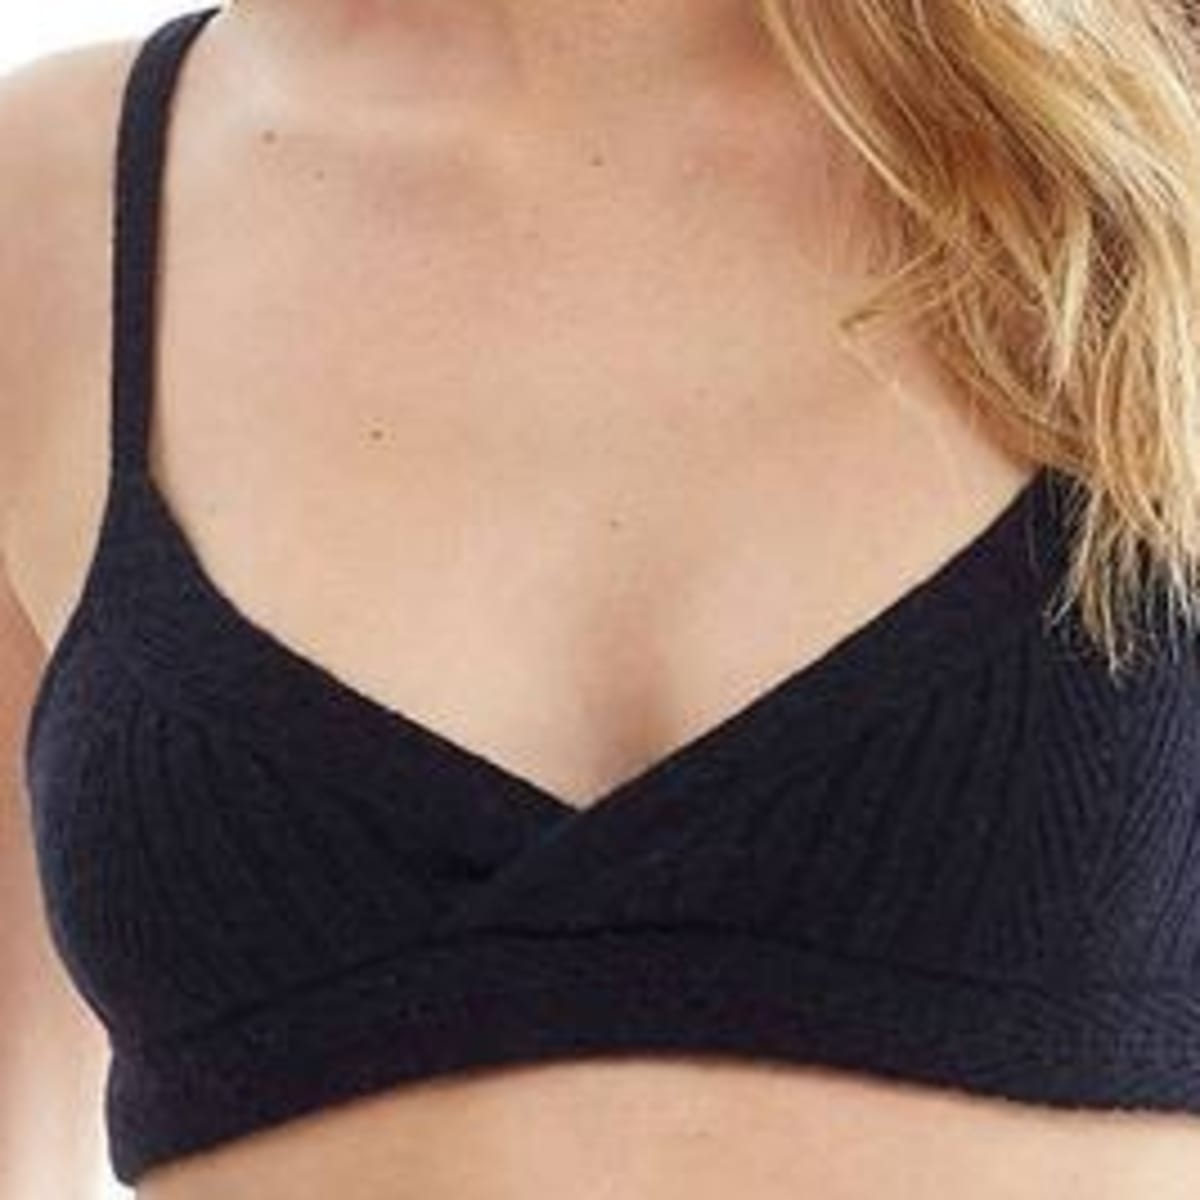 This Cashmere Bra Is Probably the Most Extravagant, Yet Delightful, Thing  Steph Owns - Fashionista